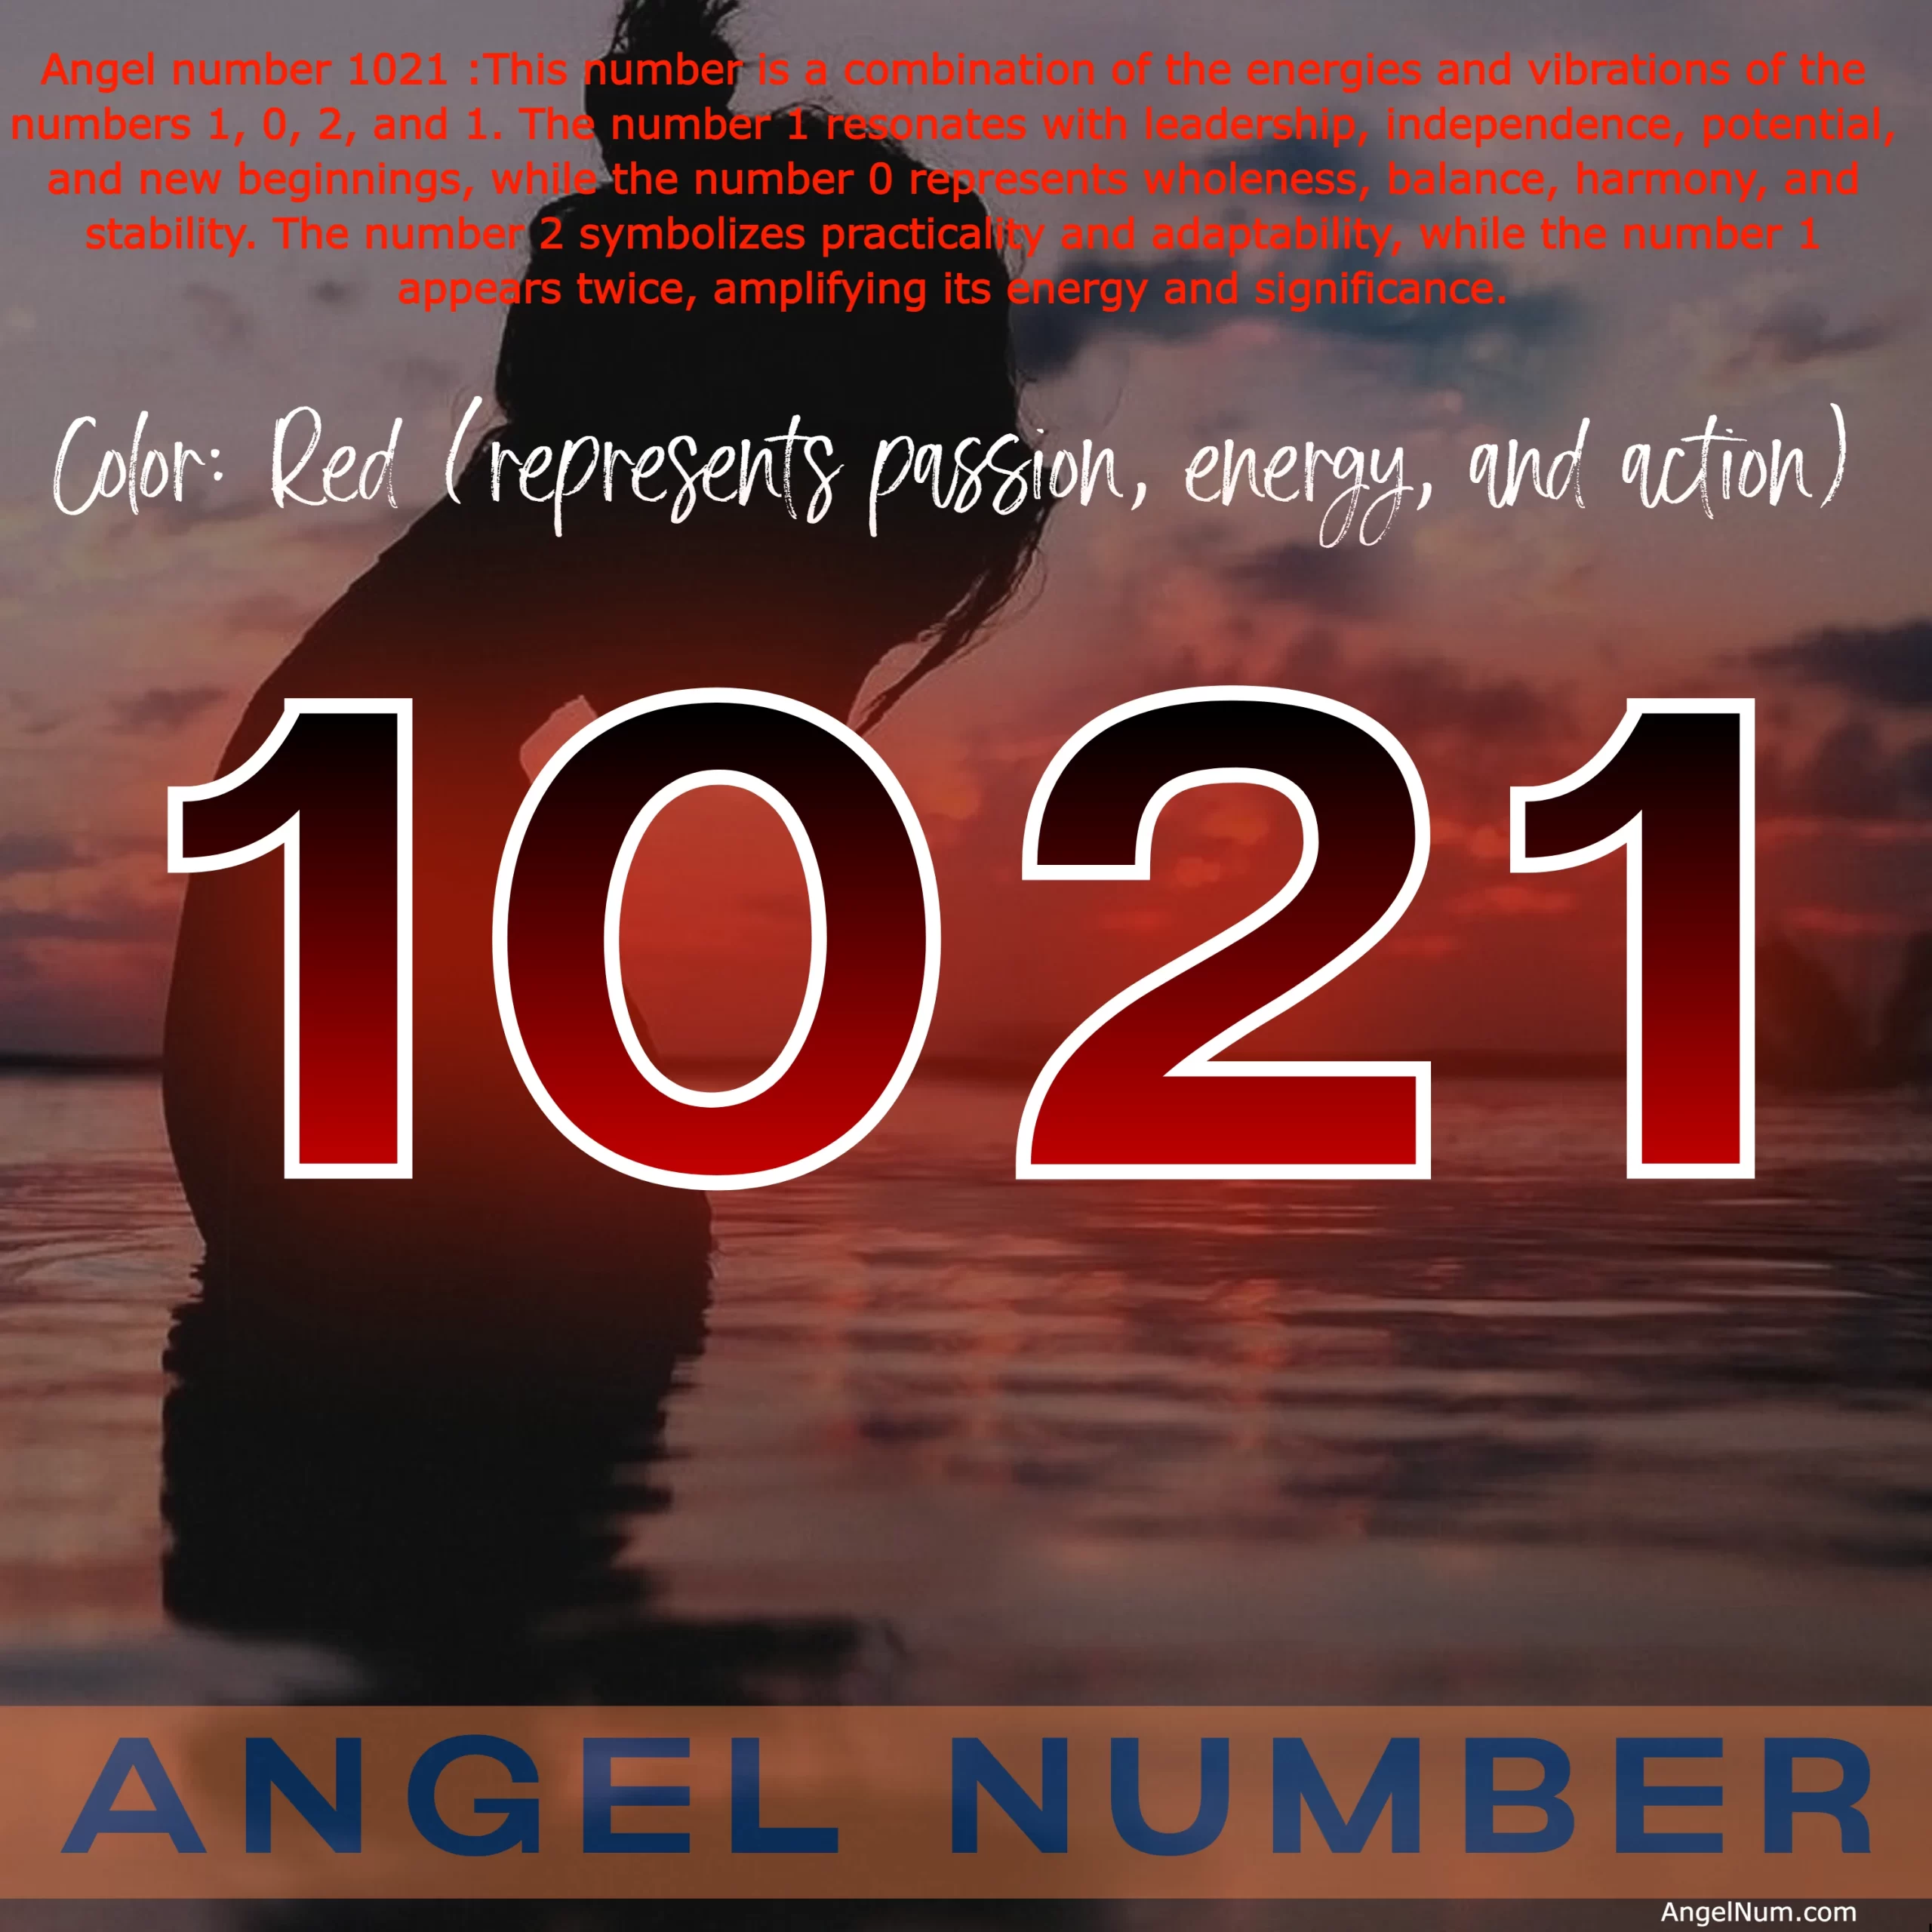 Angel Number 1021: Trust in the Journey and Focus on Your Goals